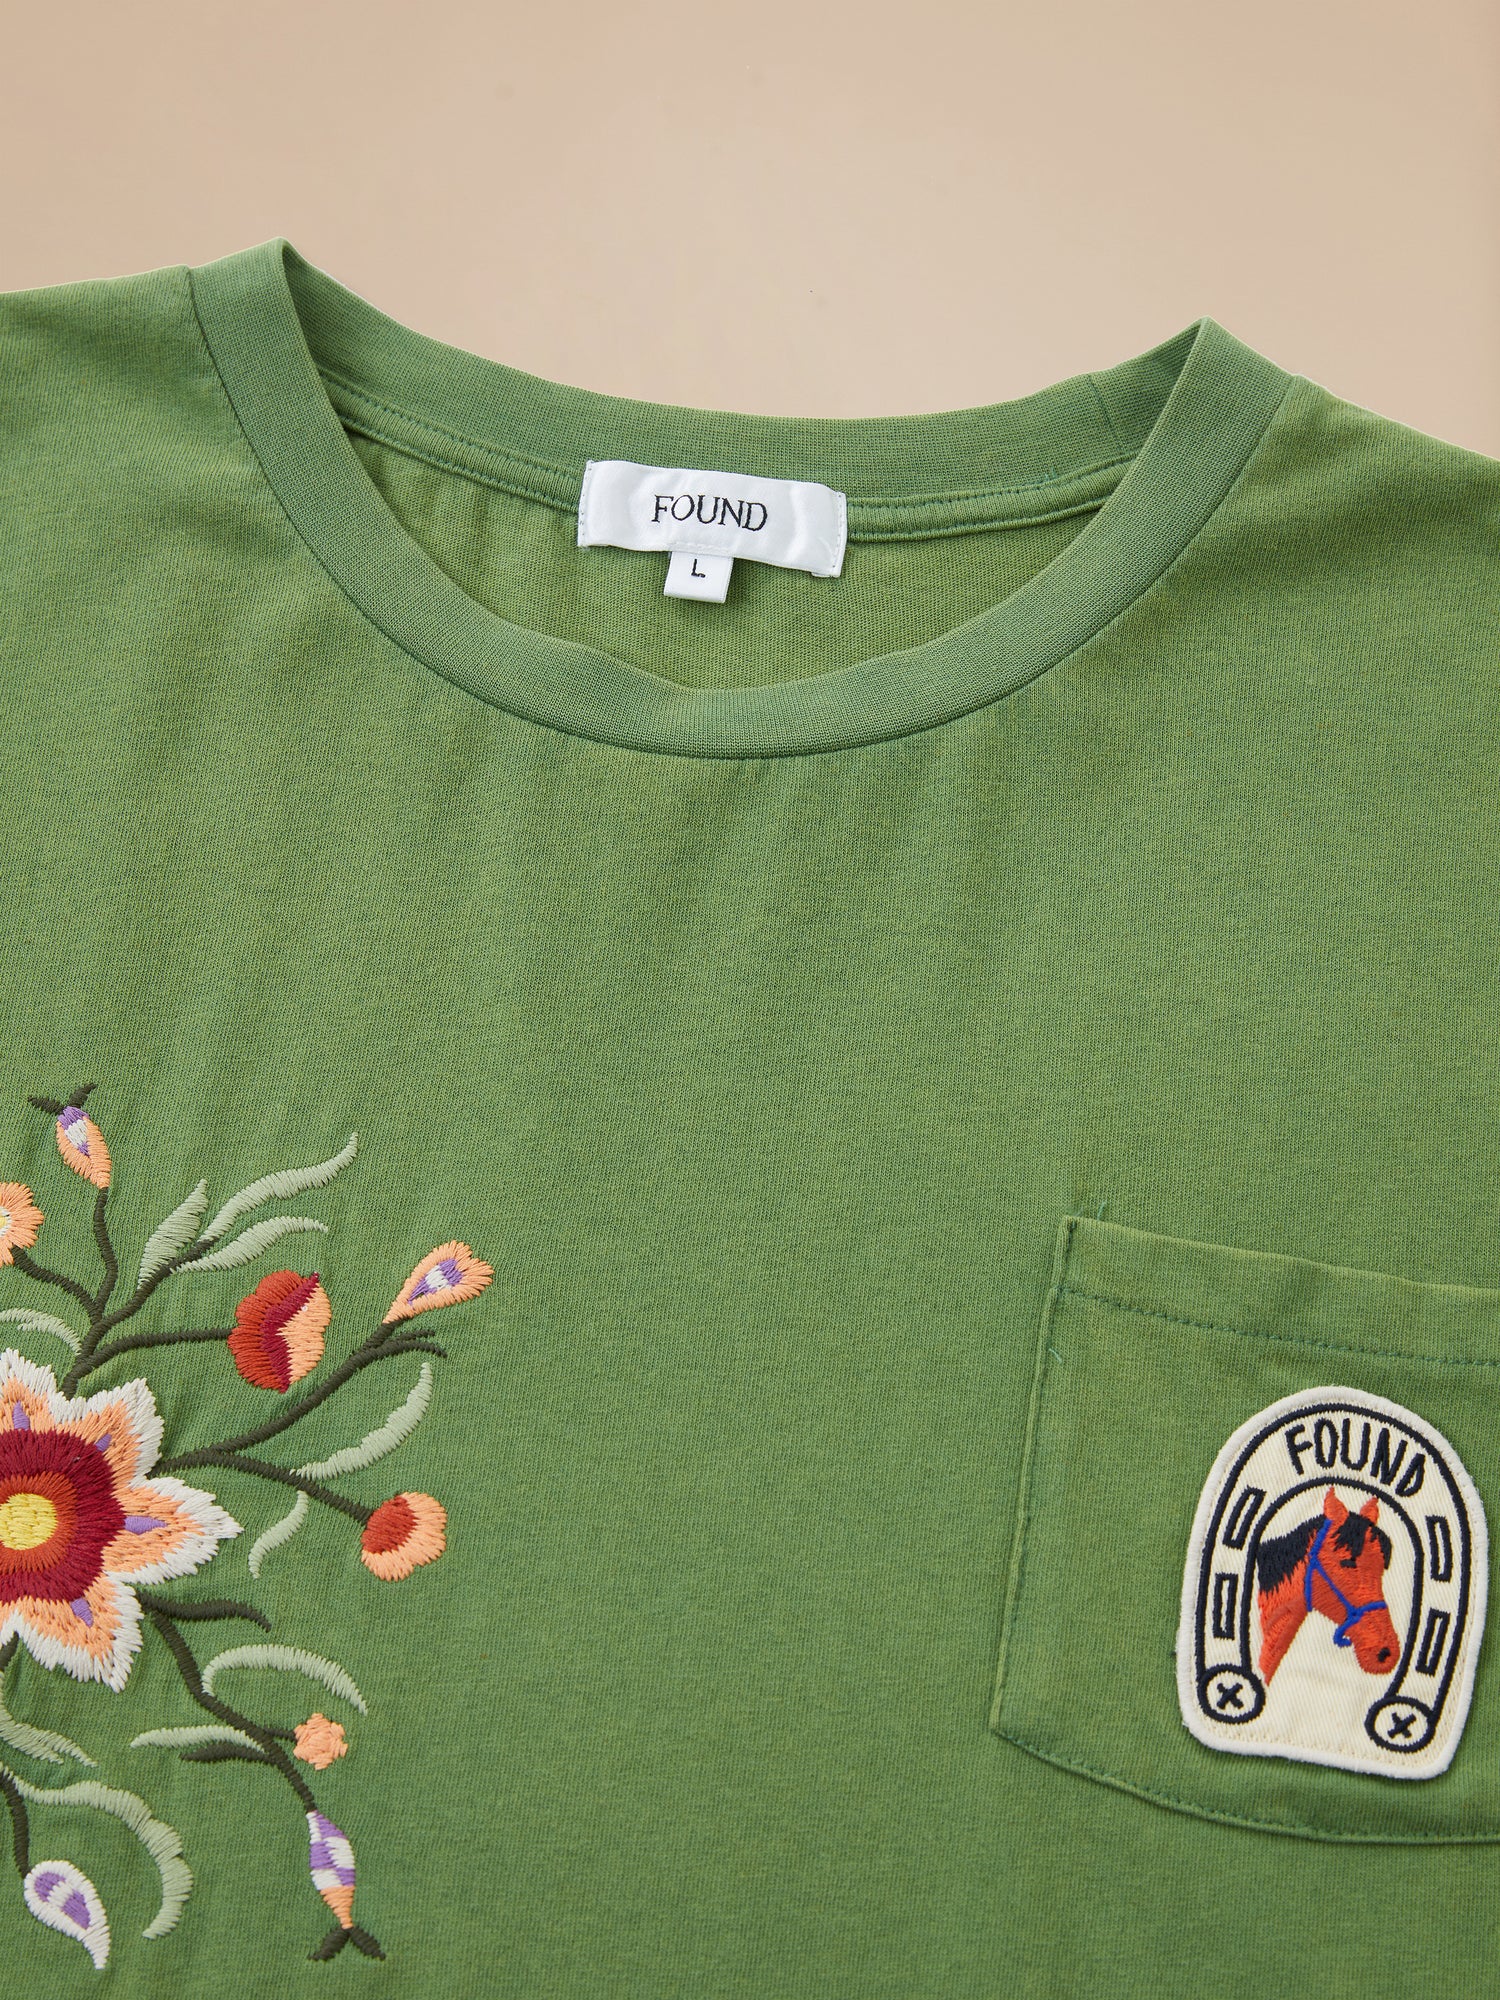 A Pine Needle Farm Tee from Found, with an embroidered pocket.